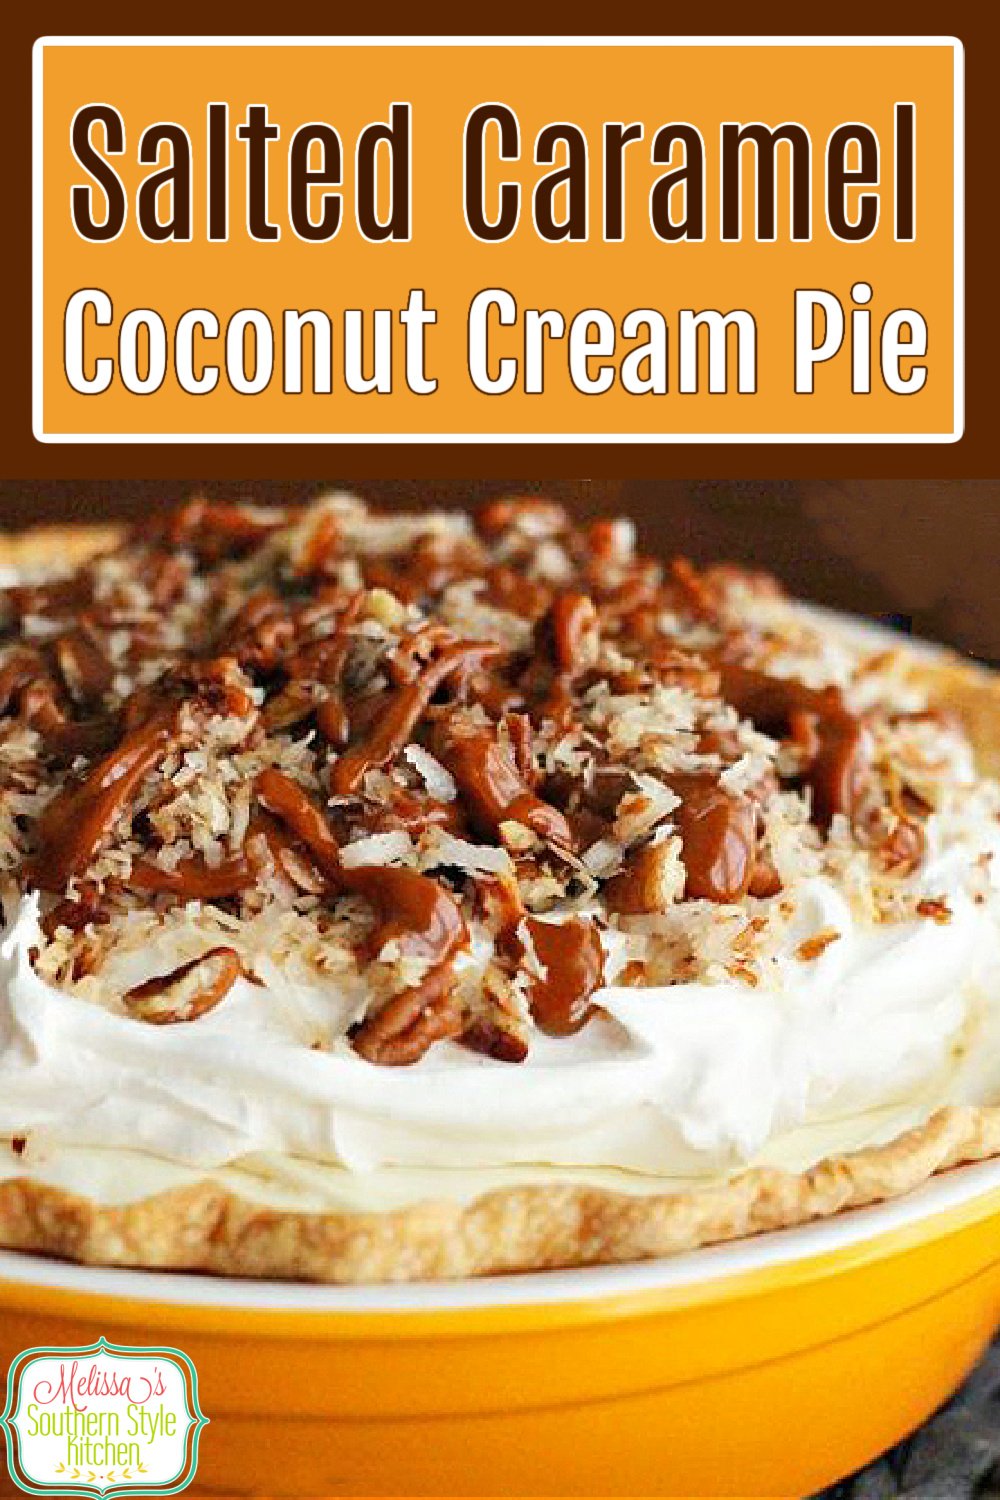 The sweet and salty fans in your life will flip for this Salted Caramel Coconut Cream Pie #coconutcreampie #caramelpie #saltedcaramel #pierecipes #coconut #desserts #dessertfoodrecipes #food #southernfood #southernrecipes via @melissasssk